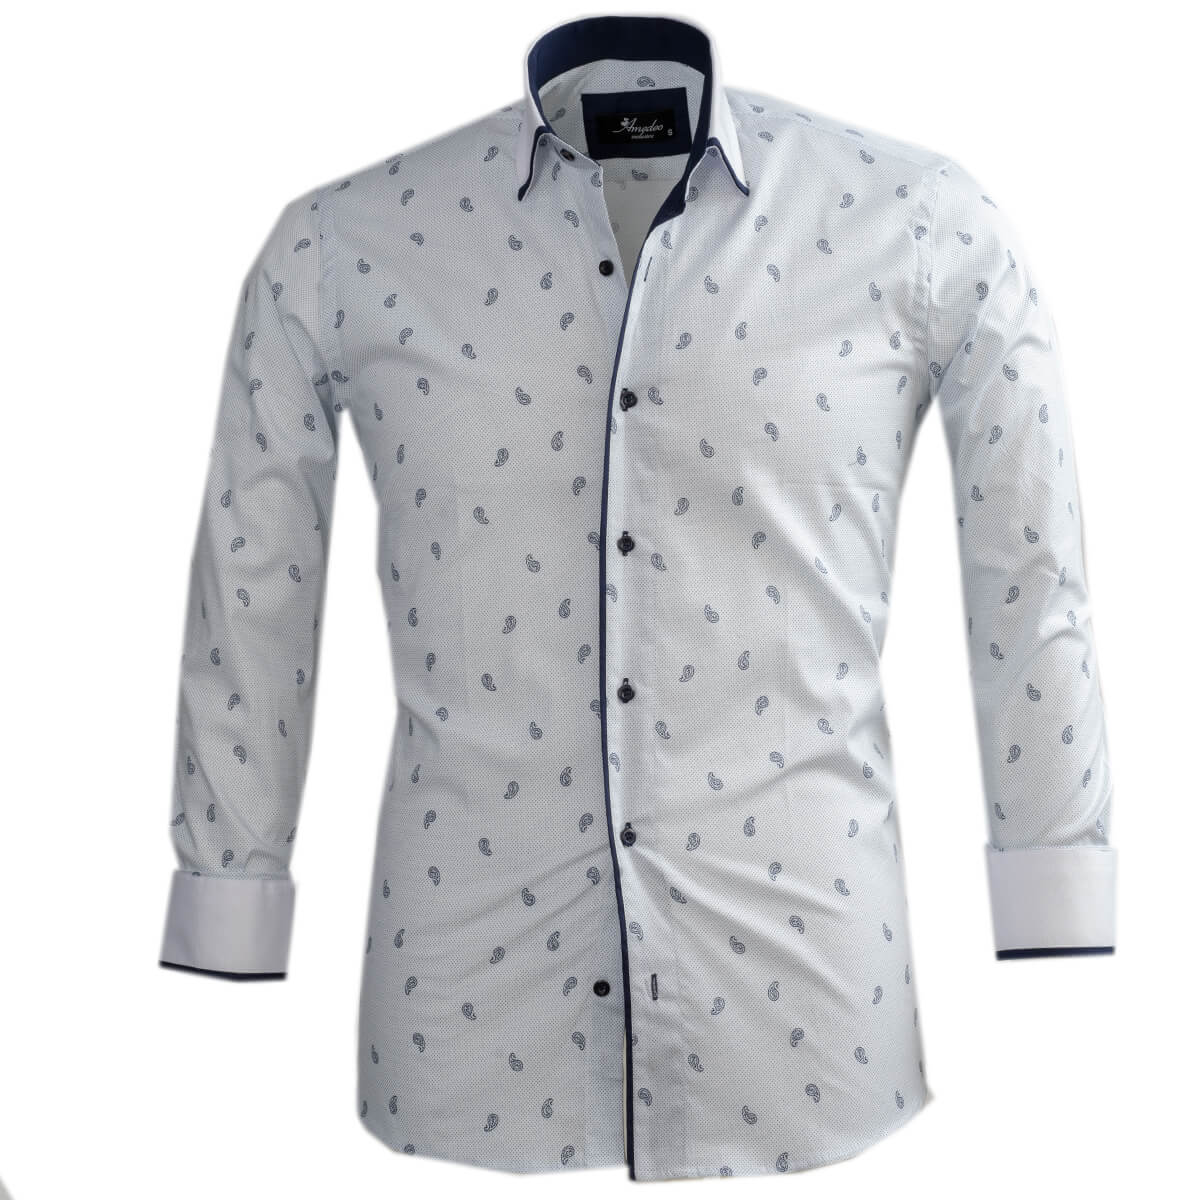 White Light Blue Paisley Mens Slim Fit Designer Dress Shirt - tailored Cotton Shirts for Work and Casual Wear - Amedeo Exclusive